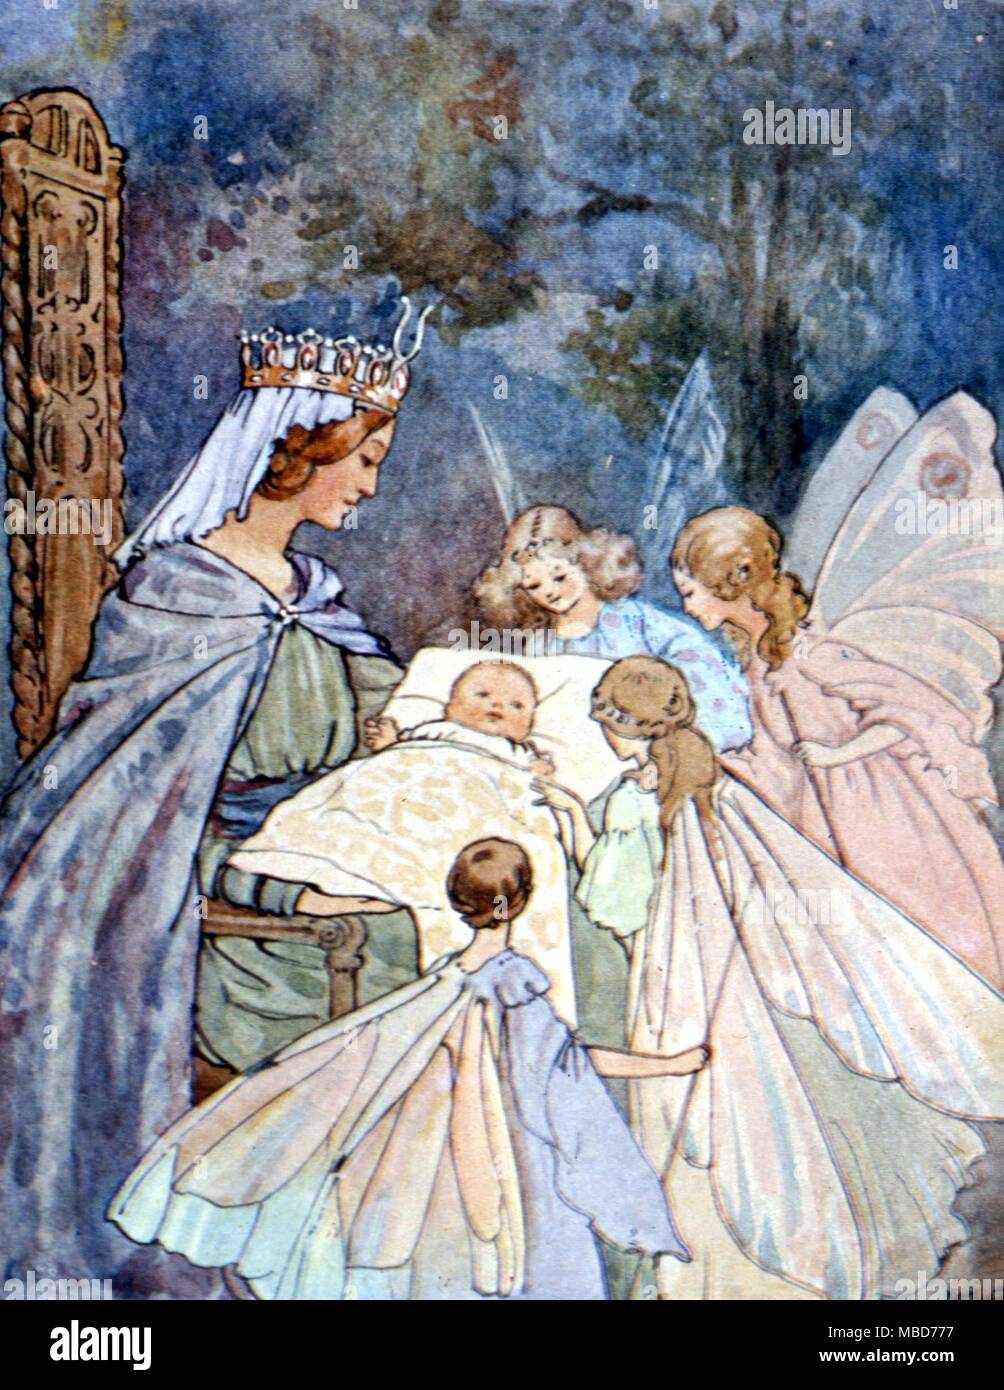 Fairy stories - The Babes in the Wood - The Robbers started to fight - Illustration by Margaret W. Tarrant for Fairy Tales, nd, but circa 1920 Stock Photo